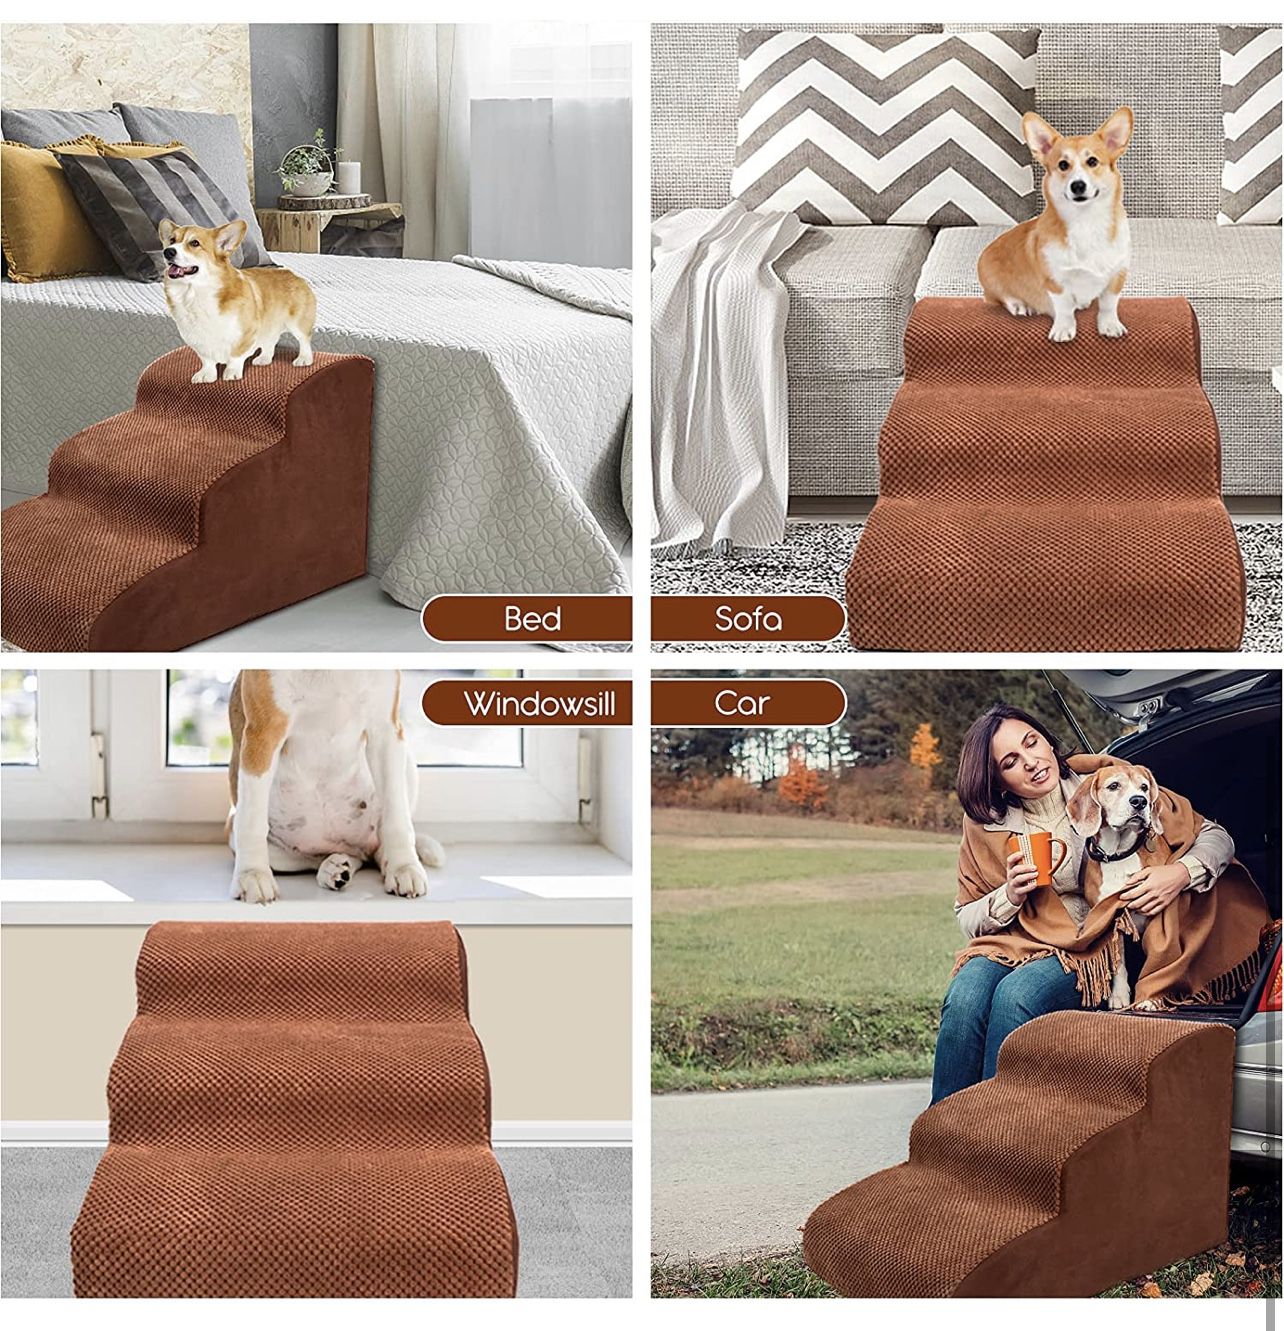 (brand new) Kphico High Density Foam Pet Steps/Ramps- Non-Slip 3 Steps Pet Stairs, 15.7" High Dog Ramp, Sofa Bed Ladder for Dogs&Cats Climbing High Be